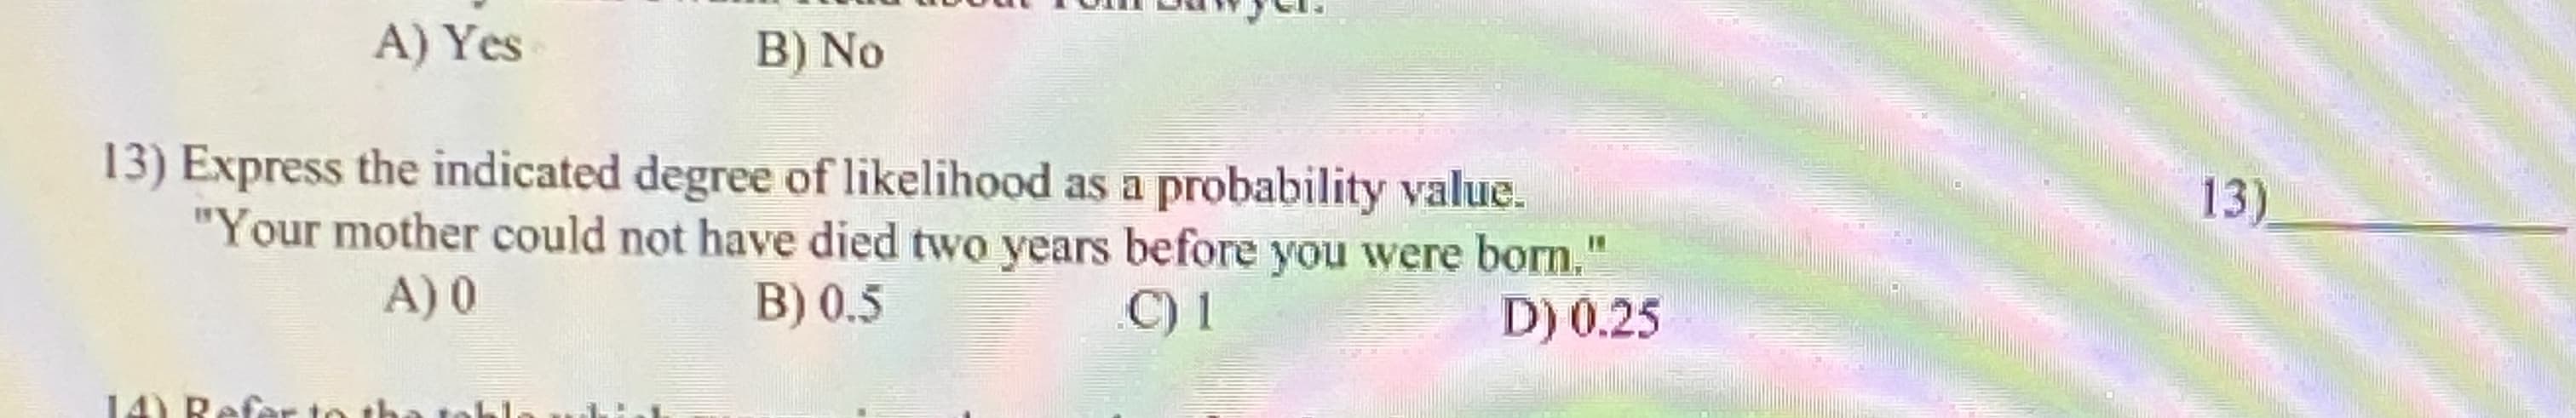 Express the indicated degree of likelihood as a probability value.
"Your mother could not have died two years before you were born."
A) 0
B) 0.5
D) 0.25
C) 1
